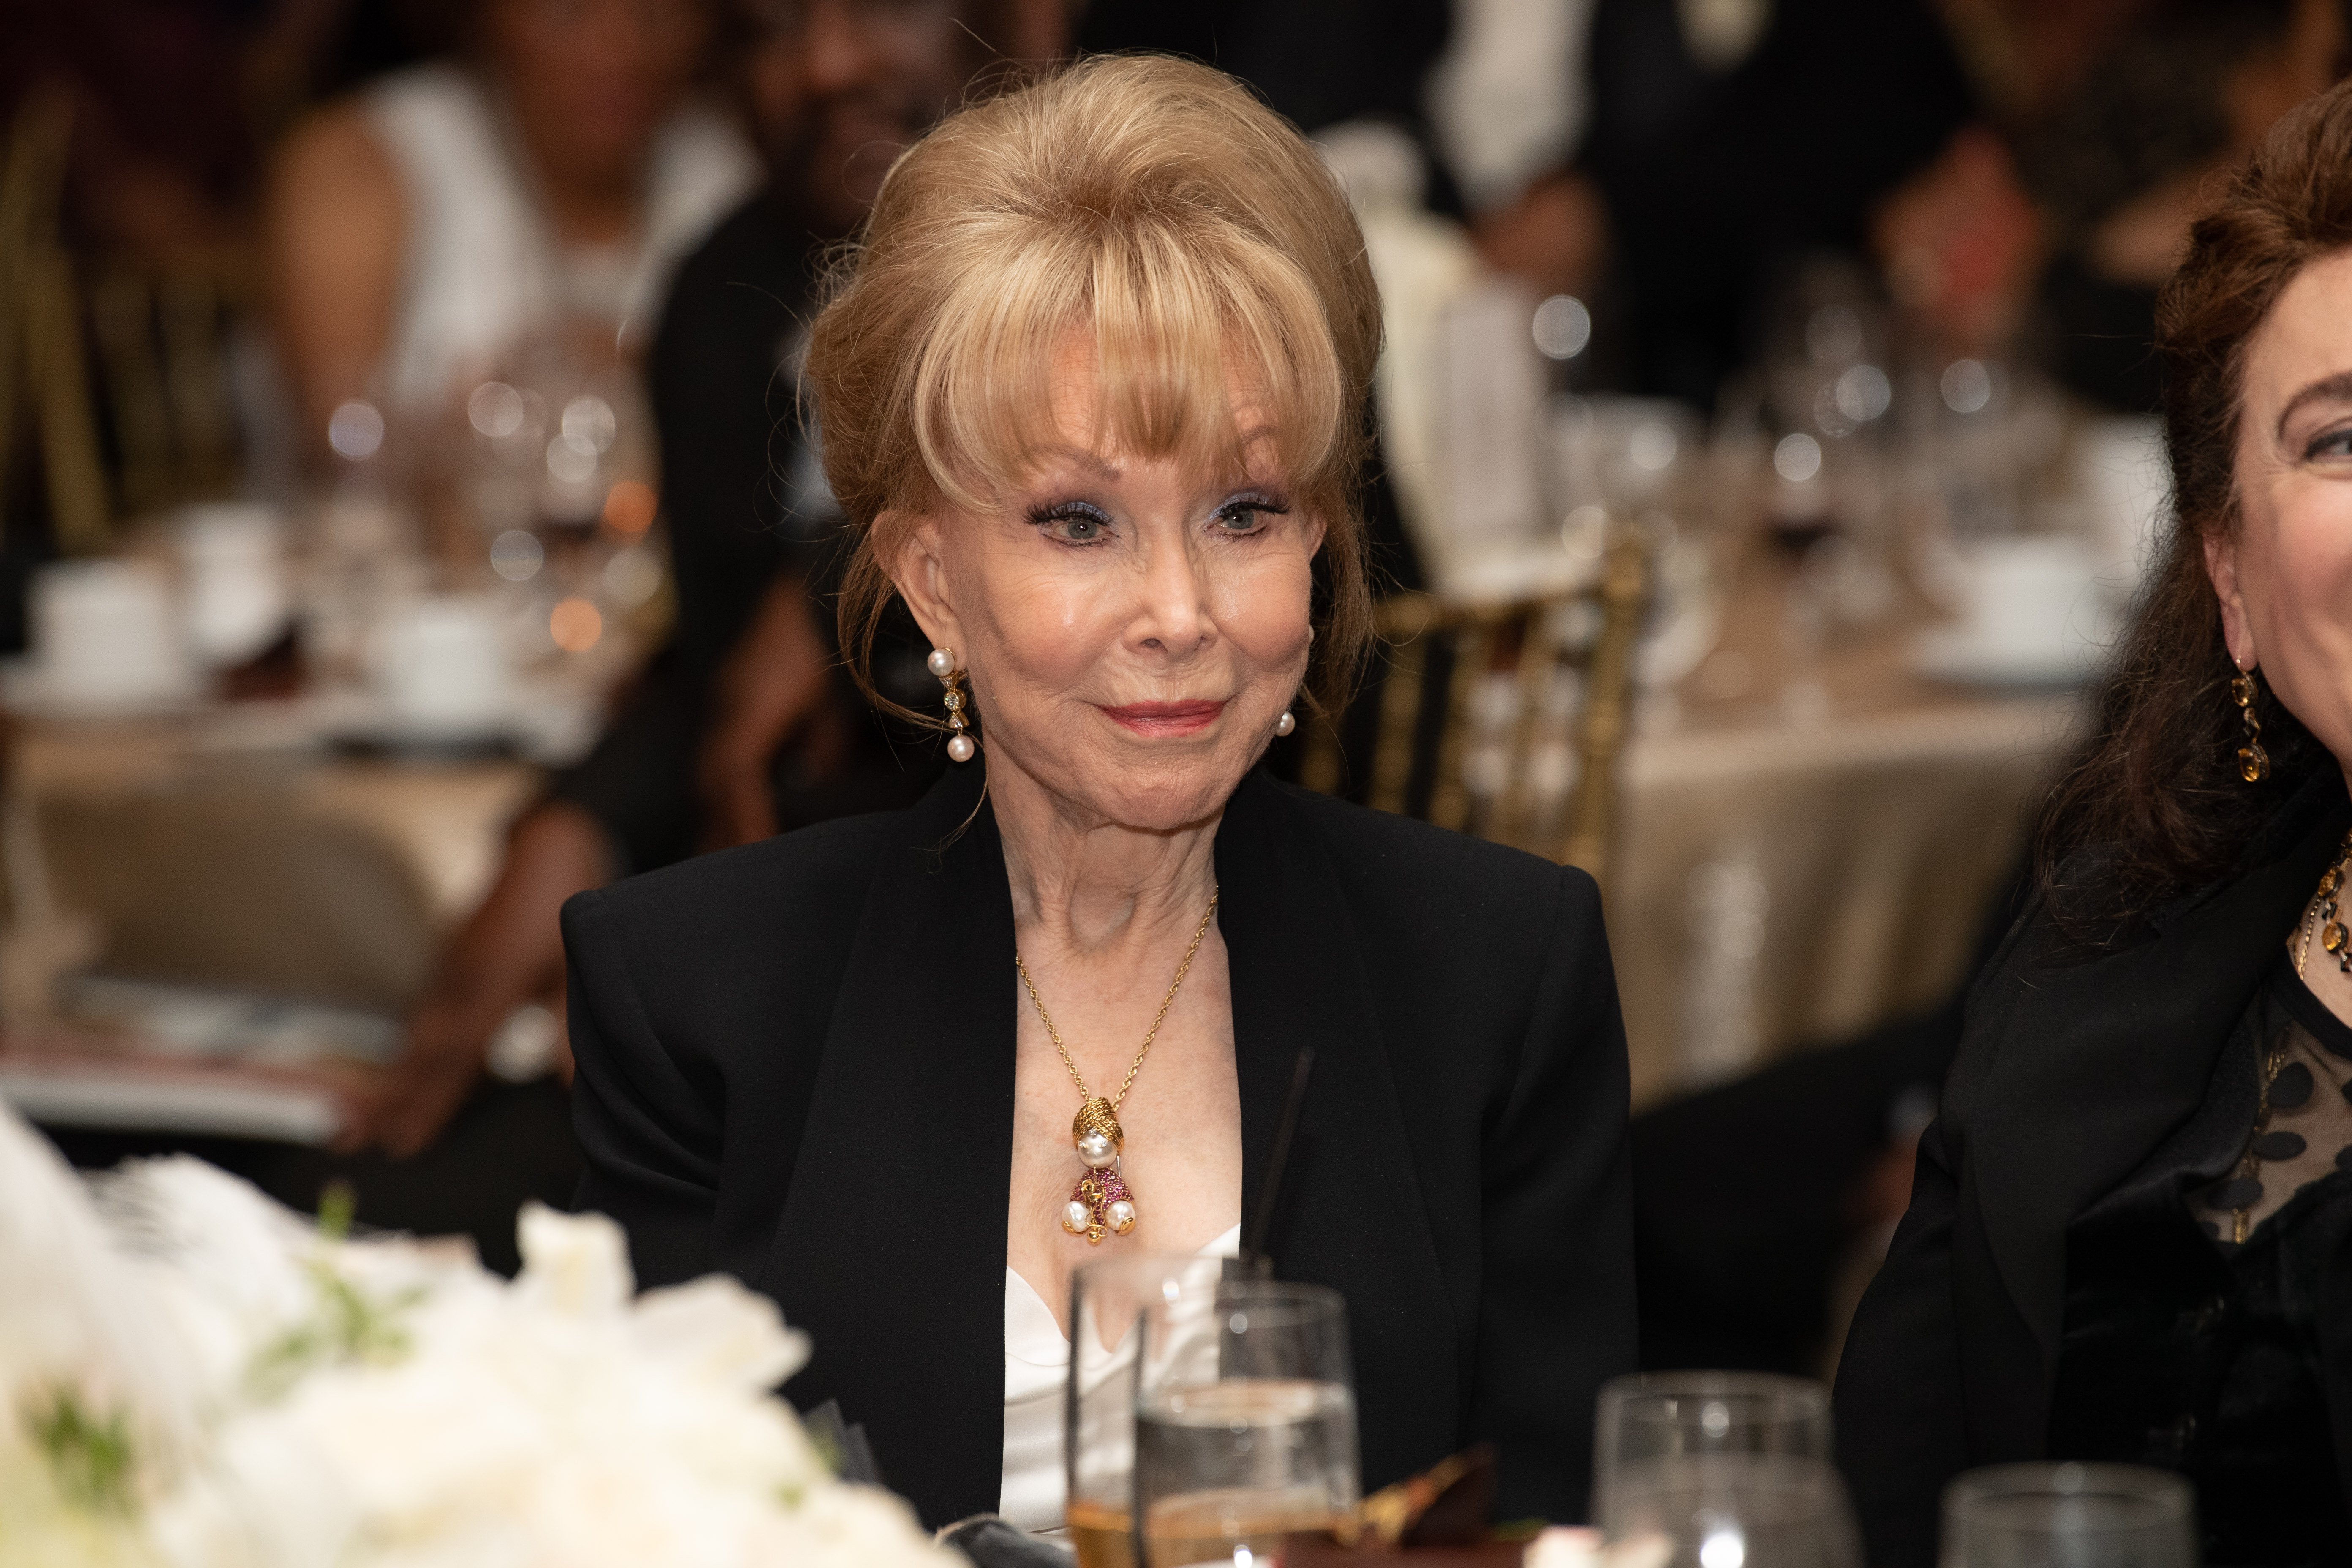 Barbara Eden attends the YWCA Greater Los Angeles 125th Anniversary Gala in Hollywood, California on November 1, 2018 | Source: Getty images